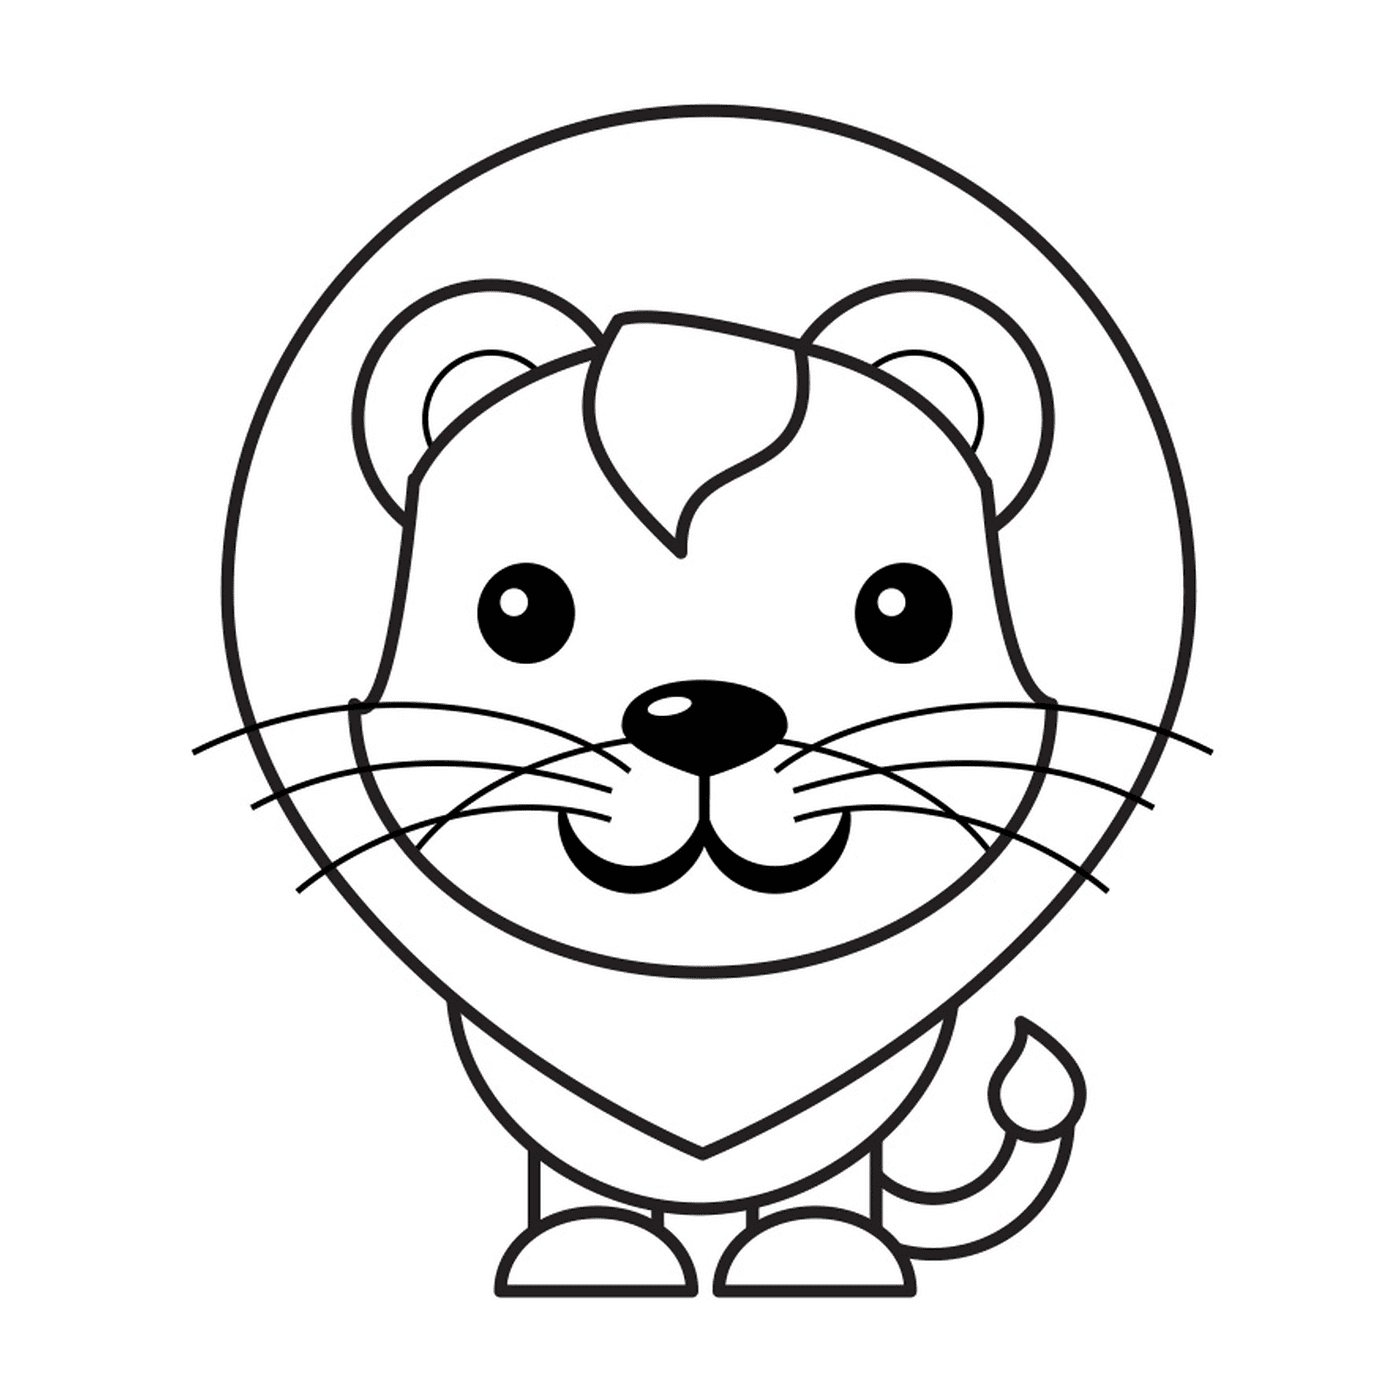  An easy to draw lion 